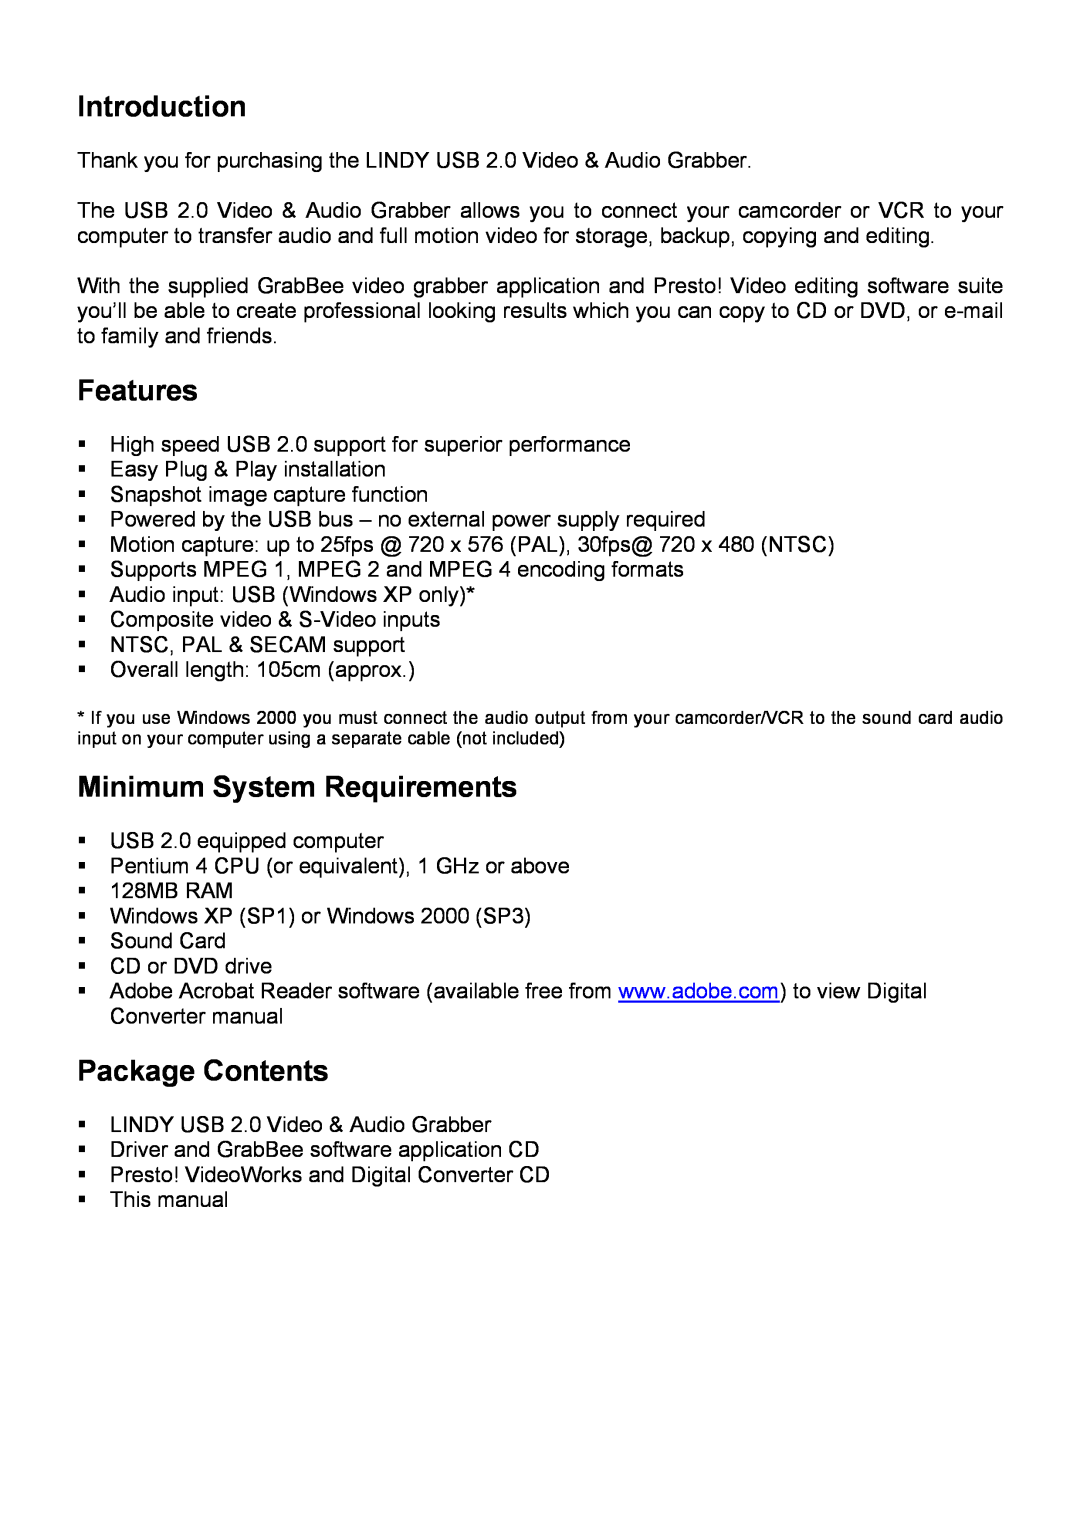 Lindy 42960 user manual Introduction, Features, Minimum System Requirements, Package Contents 